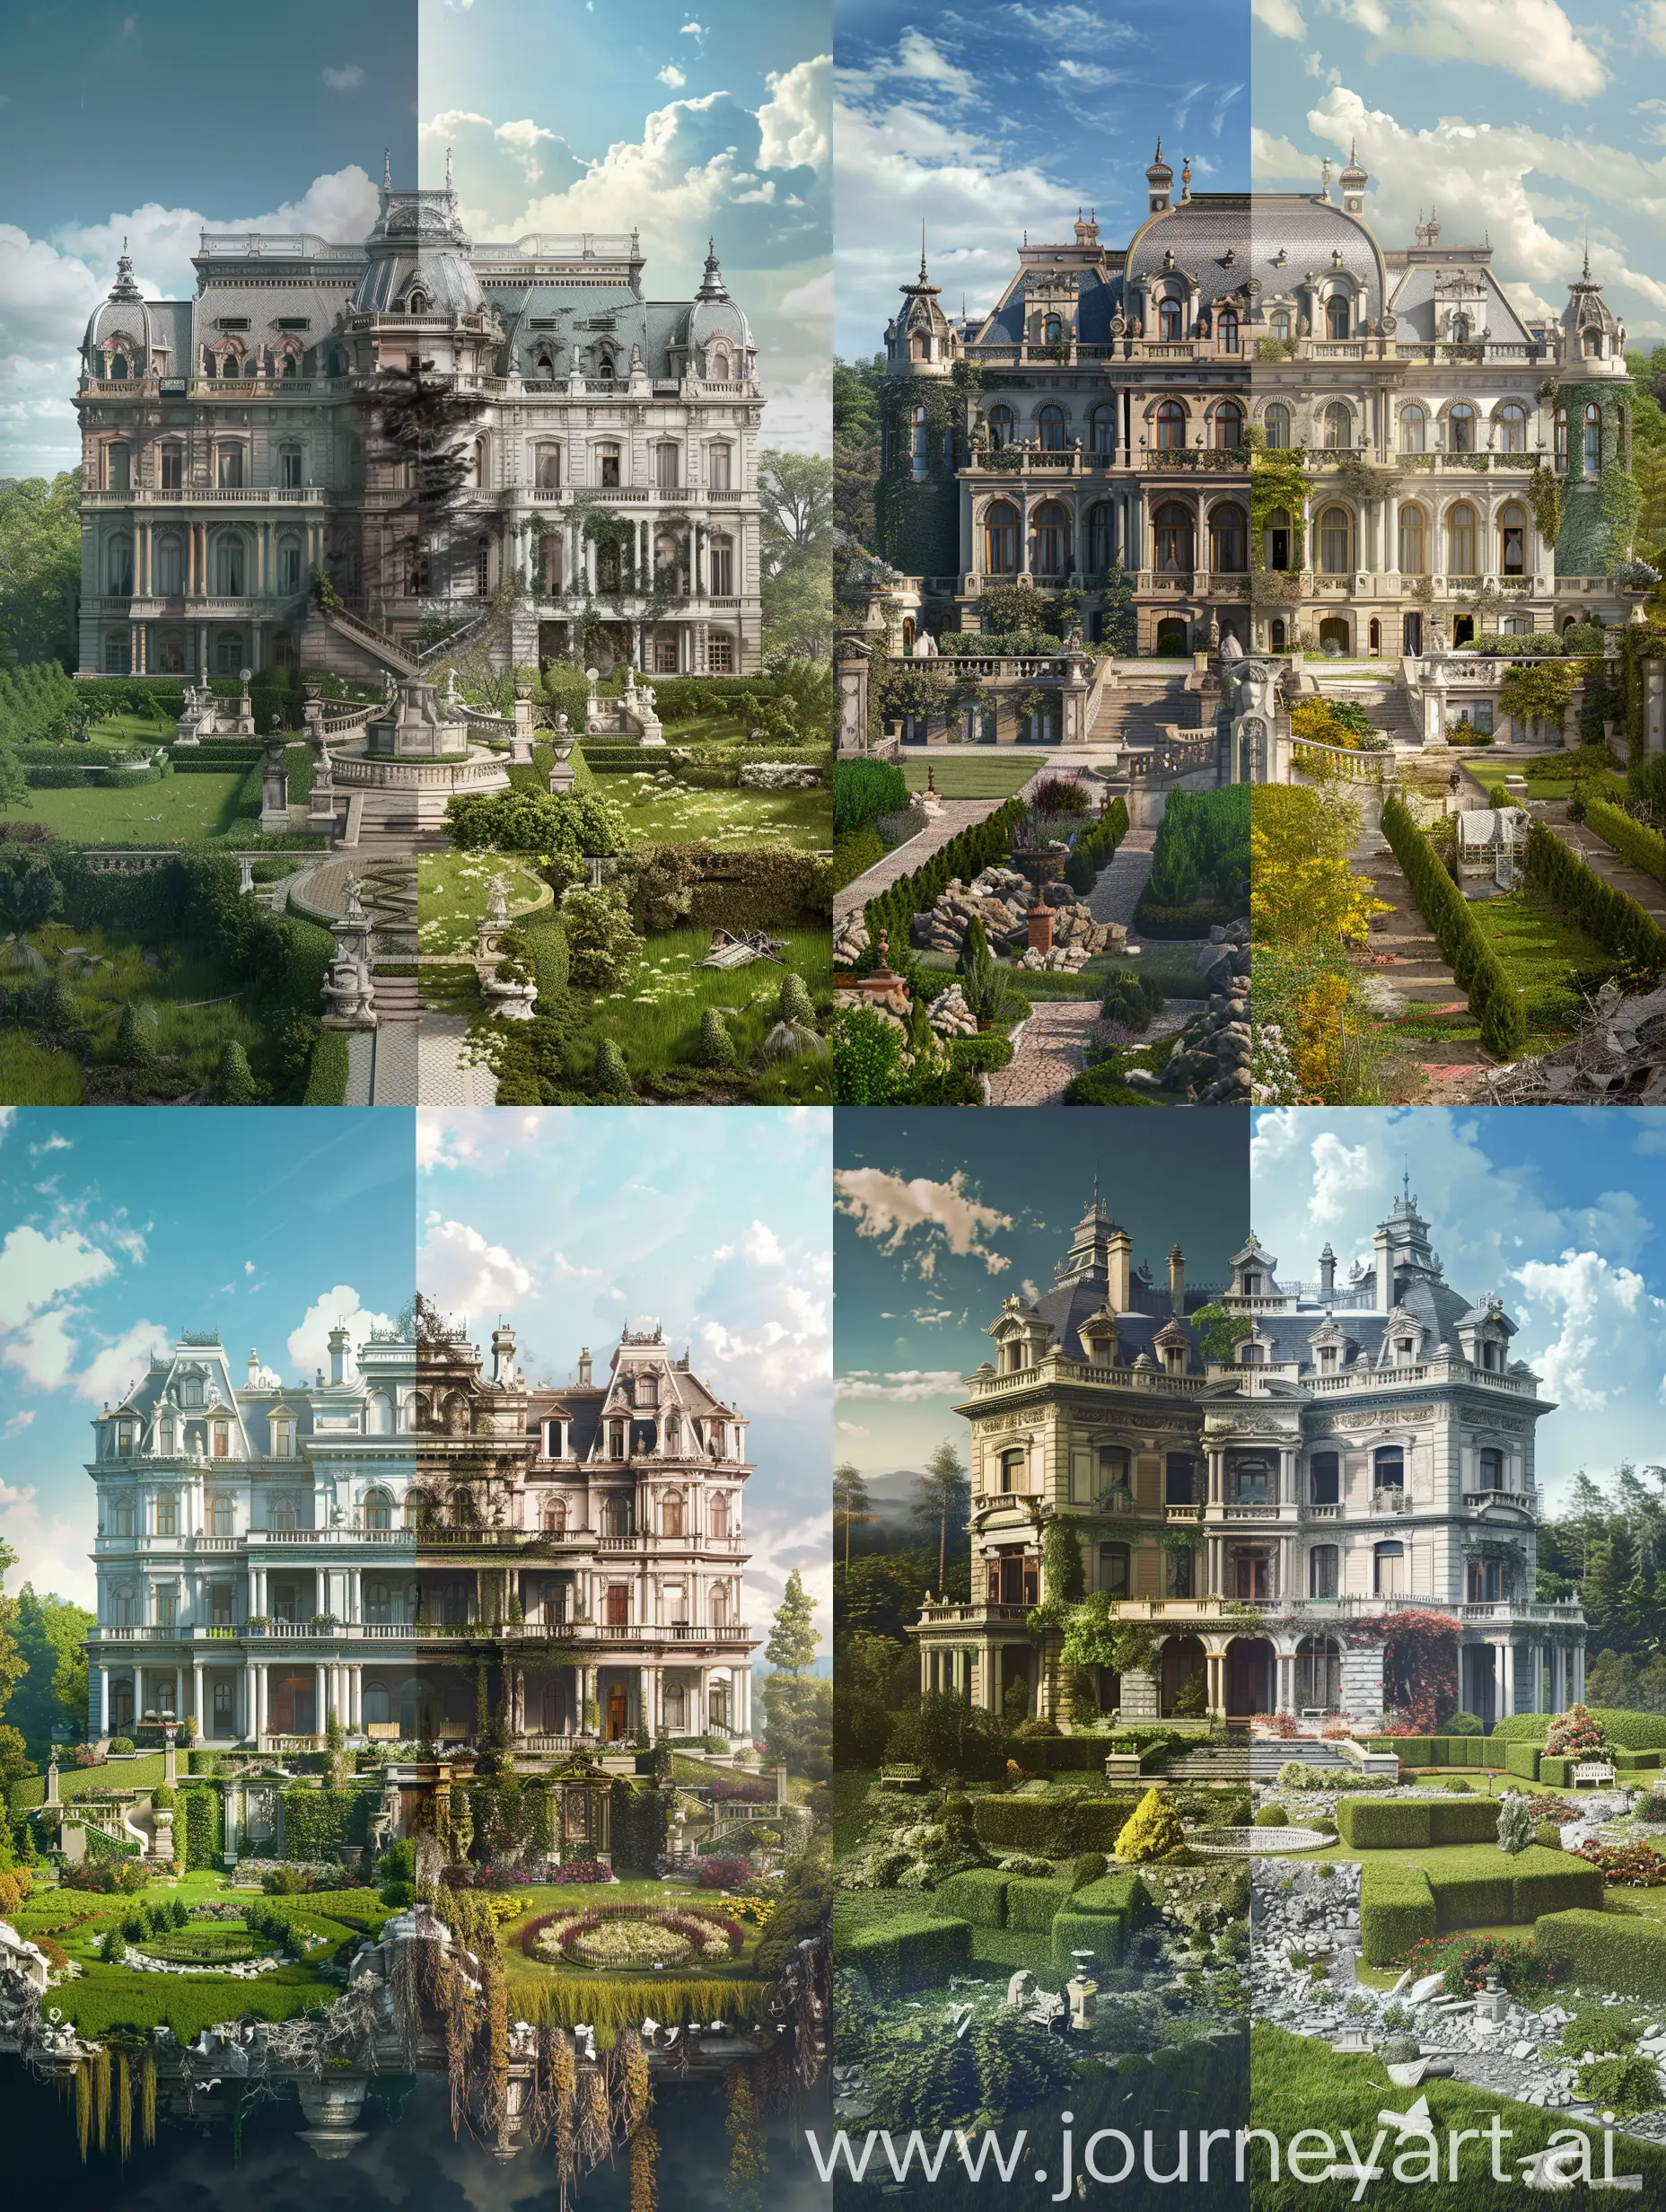 Generate a hyper-realistic and emotionally compelling YouTube video thumbnail for a documentary exploring the dramatic narrative of the Vanderbilt Empire. The image should fill the entire canvas and be divided down the middle to showcase a stark contrast between two eras. On the left side, depict the pinnacle of the Vanderbilt family's wealth with a focus on an extravagant mansion, symbolizing their peak prosperity. This side should feature luxurious elements such as intricate architecture, manicured gardens, and symbols of wealth to emphasize the family's opulence and power during their zenith. On the right side, illustrate the empire's decline with a portrayal of the same mansion in a state of disrepair or neglect, highlighting overgrown gardens, faded glory, and a sense of abandonment. This contrast should visually narrate the rise and fall of the Vanderbilt Empire, capturing the viewer's curiosity and drawing them into the historical saga of wealth and loss. The design should aim for photo-realistic detail to ensure the story is conveyed with depth and emotion, engaging the viewer's interest without the need for text or explanatory elements.